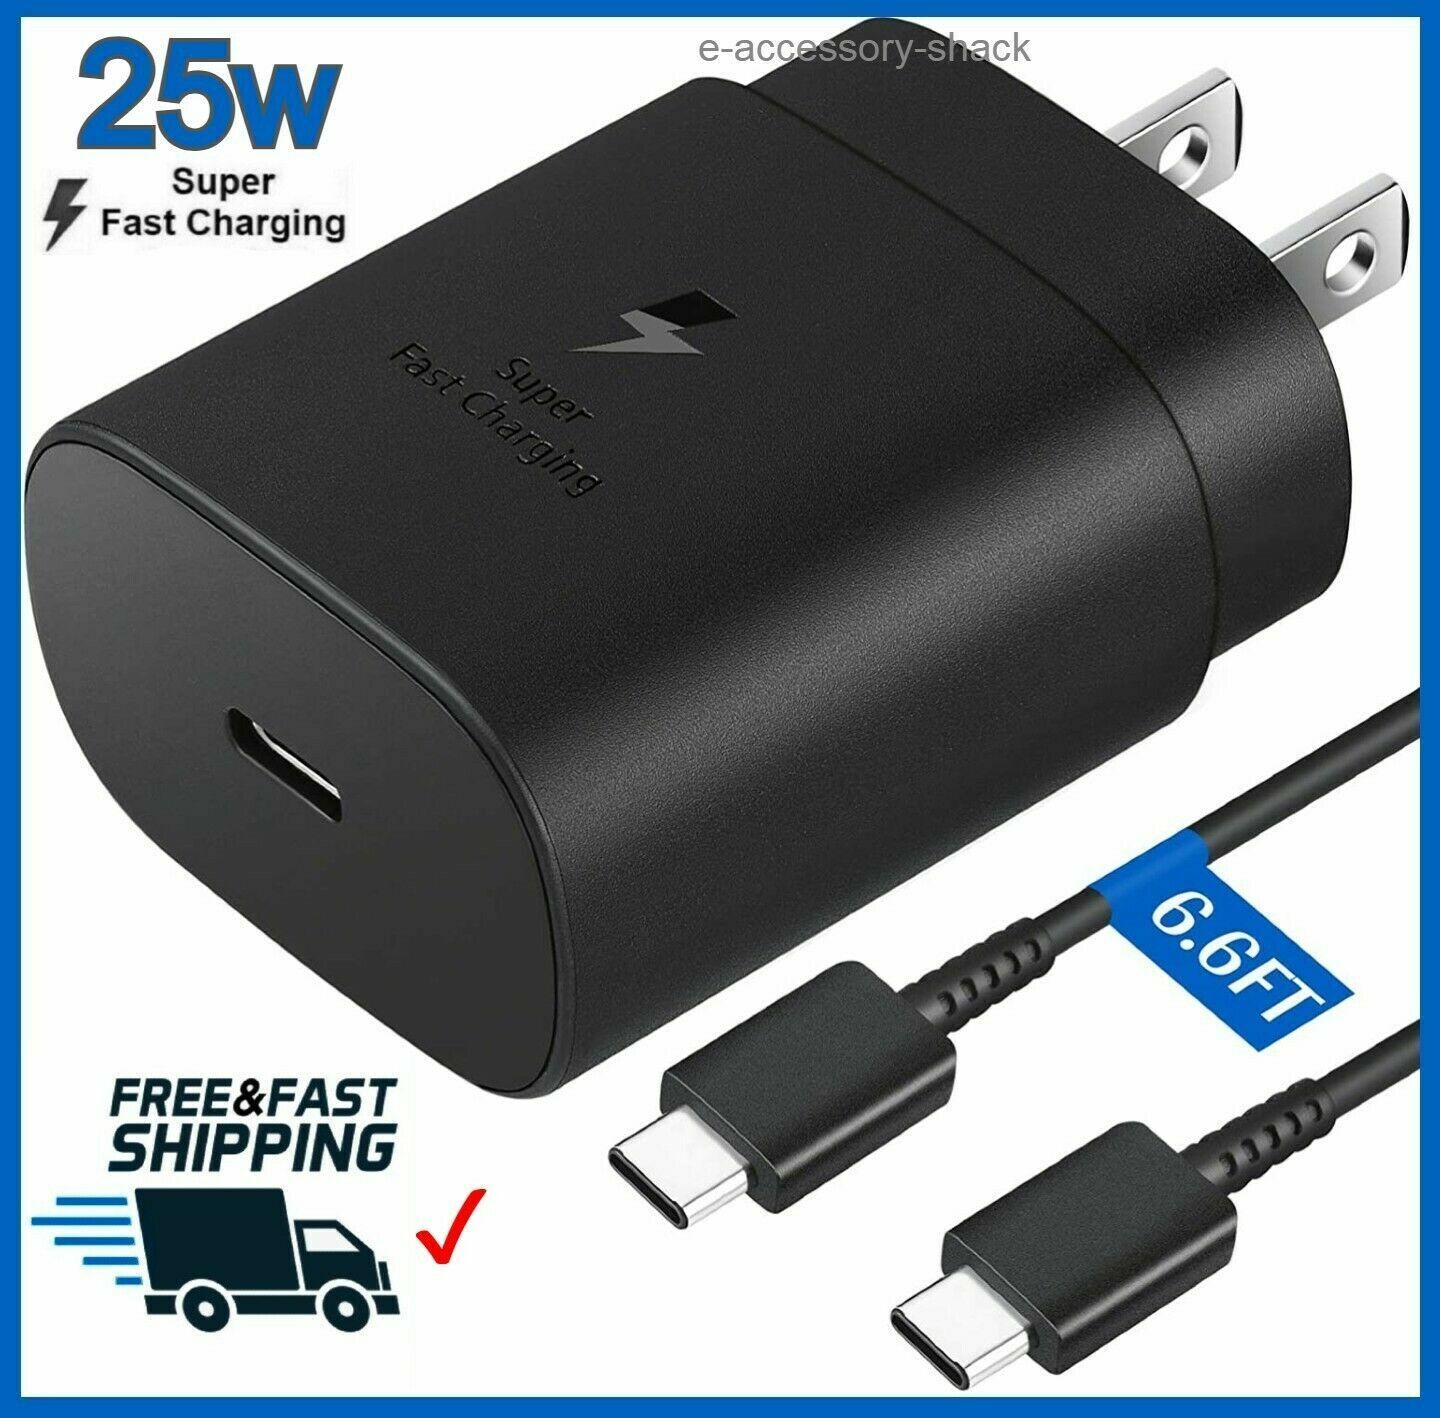 25w Type USB-C Super Fast Wall Charger+6FT Cable For Samsung Galaxy S22+Ultra 5G Custom Bundle: Yes Items Included: W